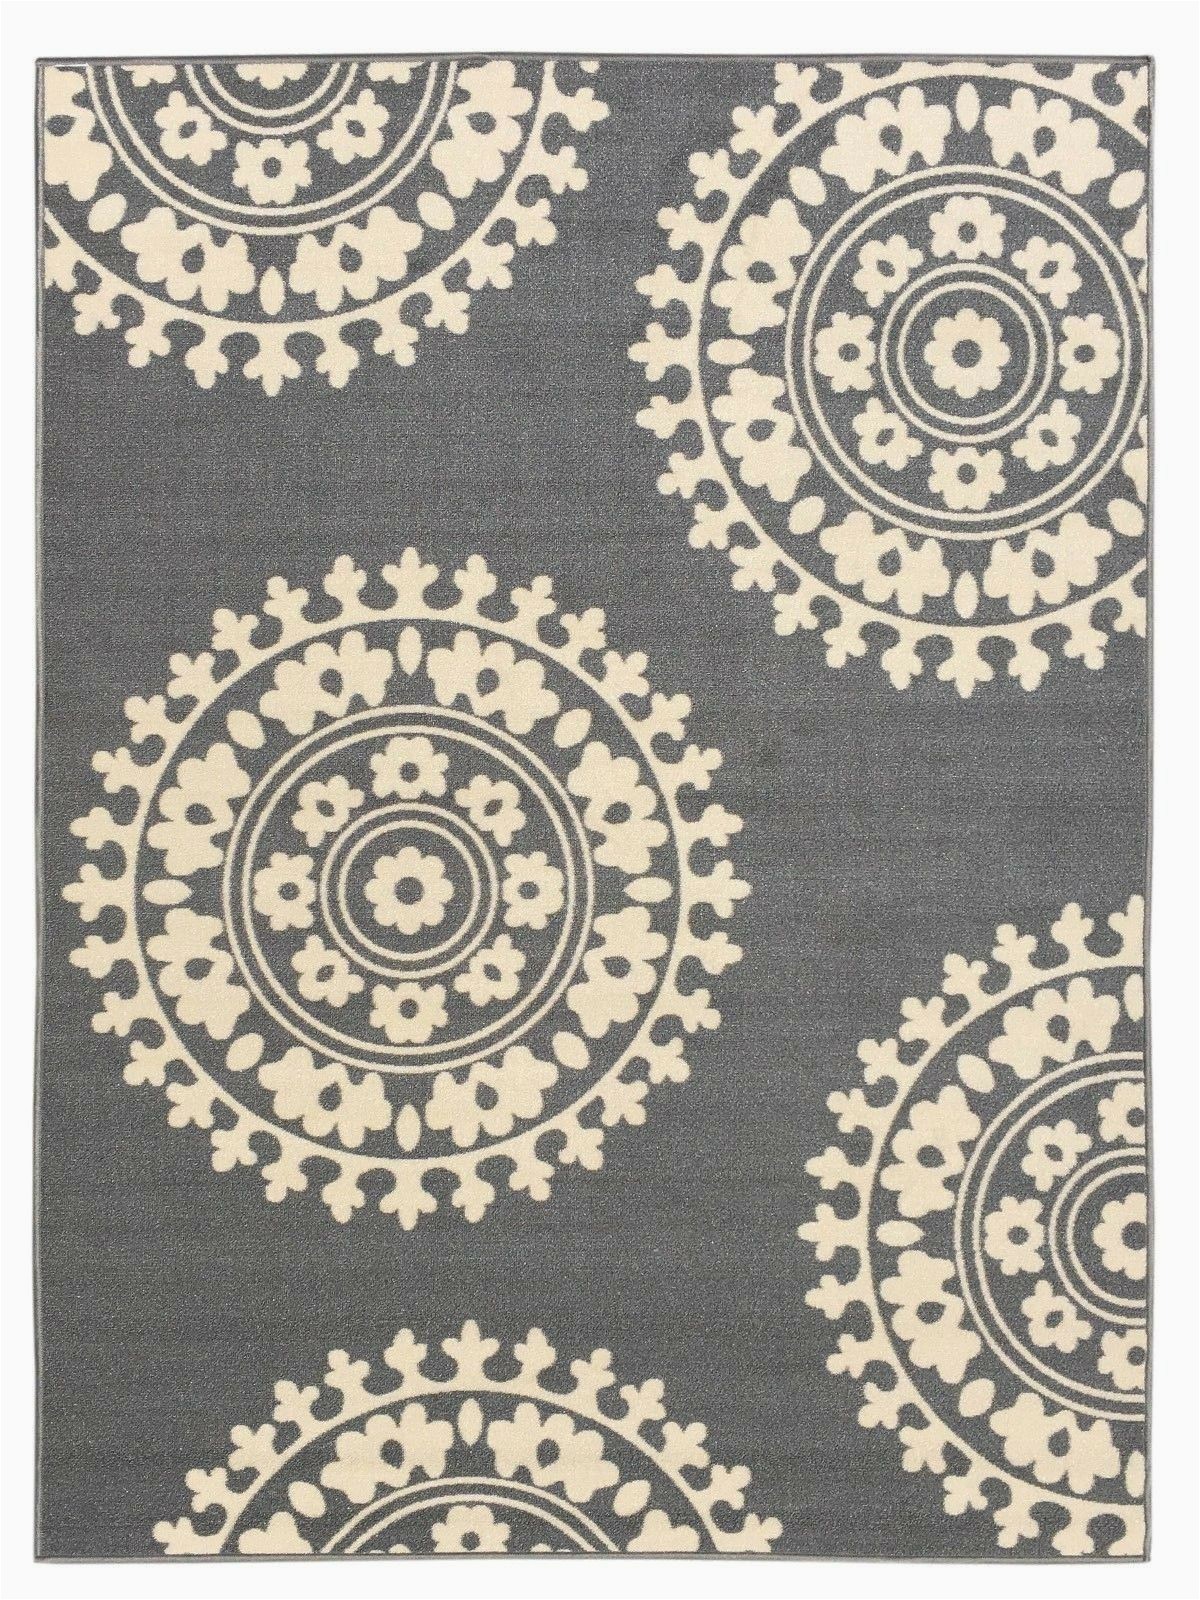 5×7 Rubber Backed area Rug Rubber Backed Non Skid Non Slip Gray Ivory Color Medallion Design area Rug